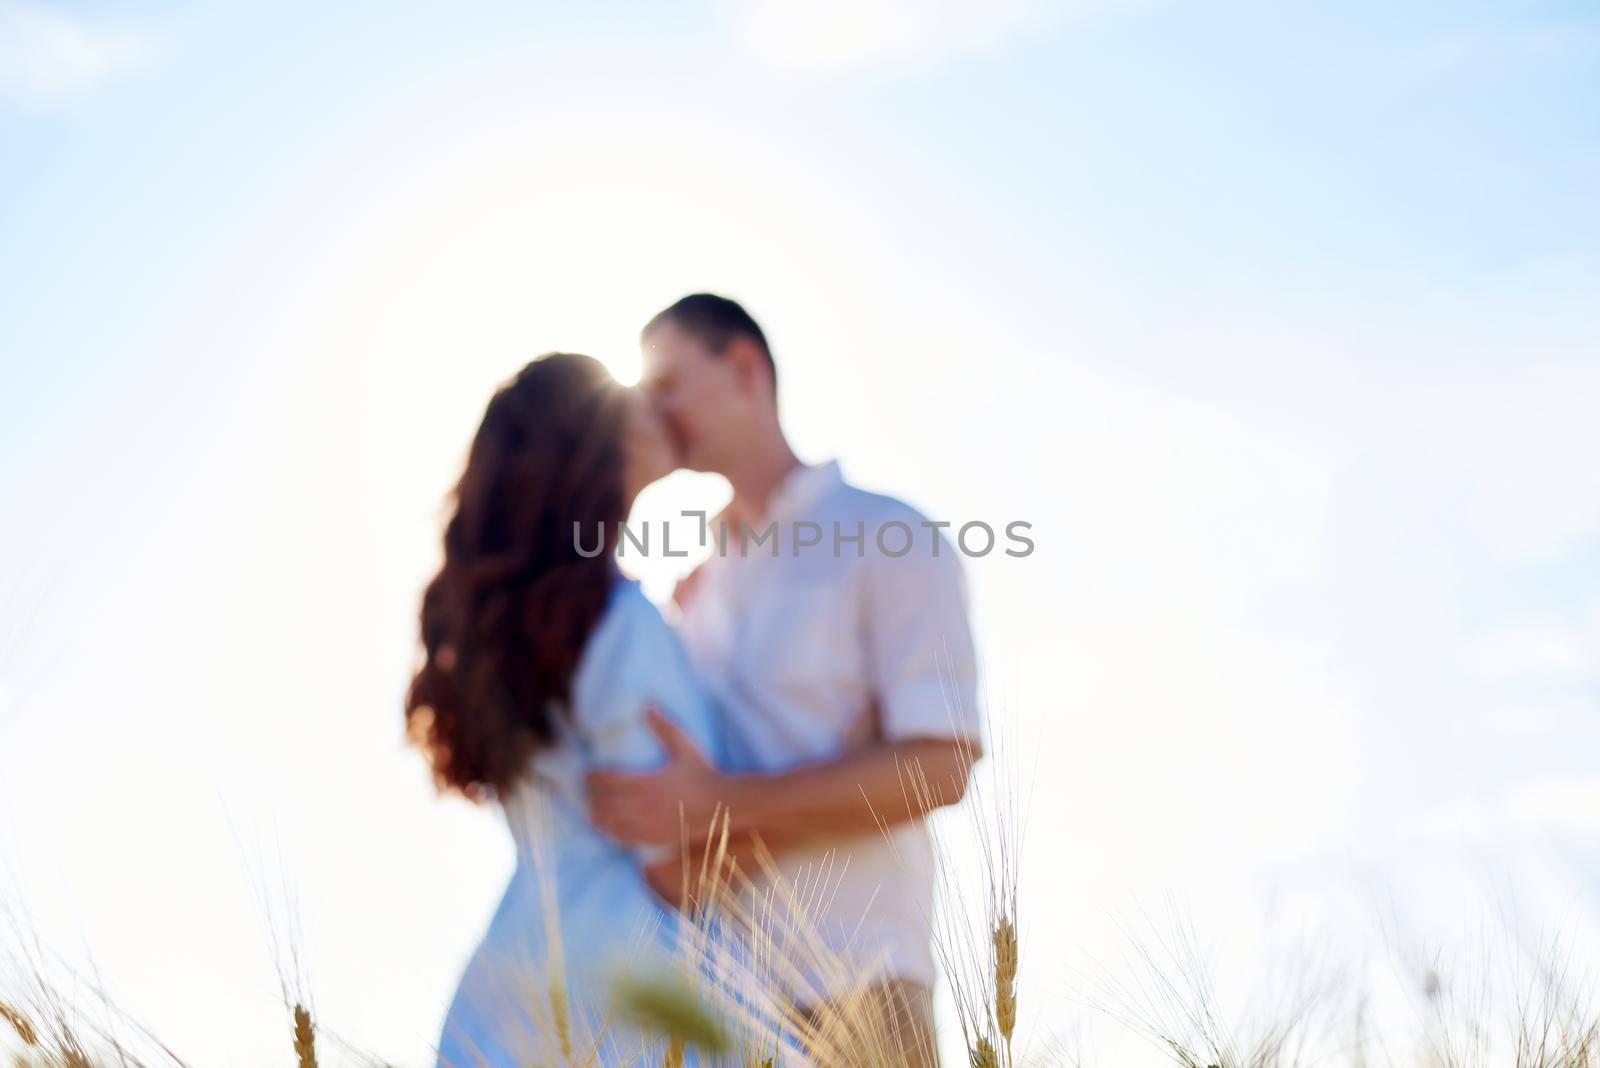 Awesome happy couple have fun in a field sunset background. Lifestyle and travel concept.